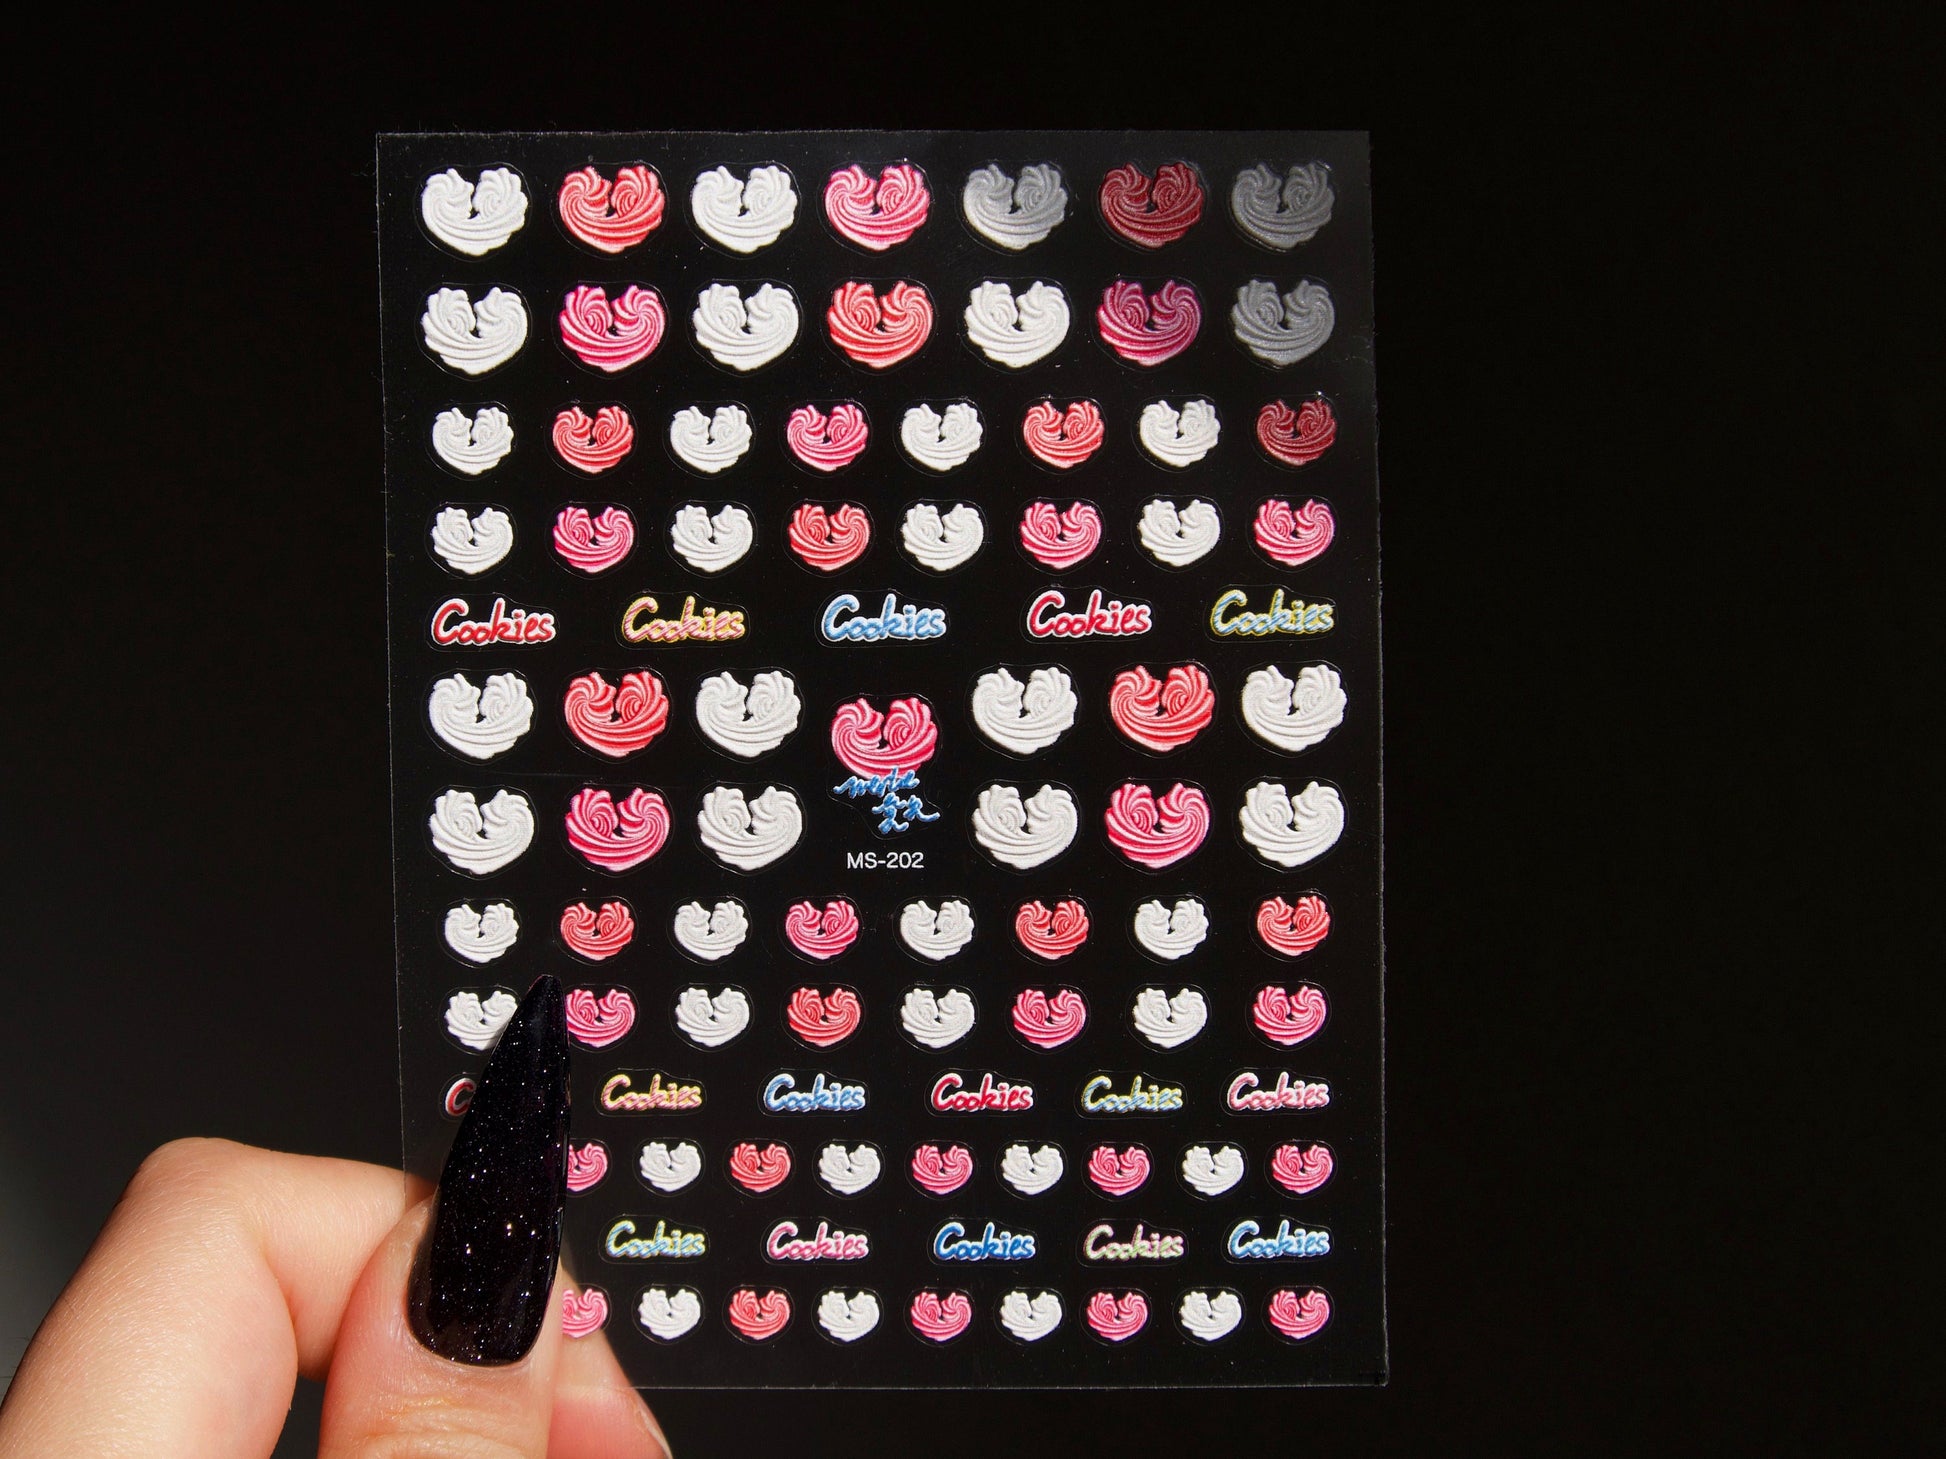 Heart Cookies Nail Sticker/ Snack Cream Pink Chocolate Cookie Sweets Self Adhesive Decals/Kawaii 3D Embossed Manicure Supply